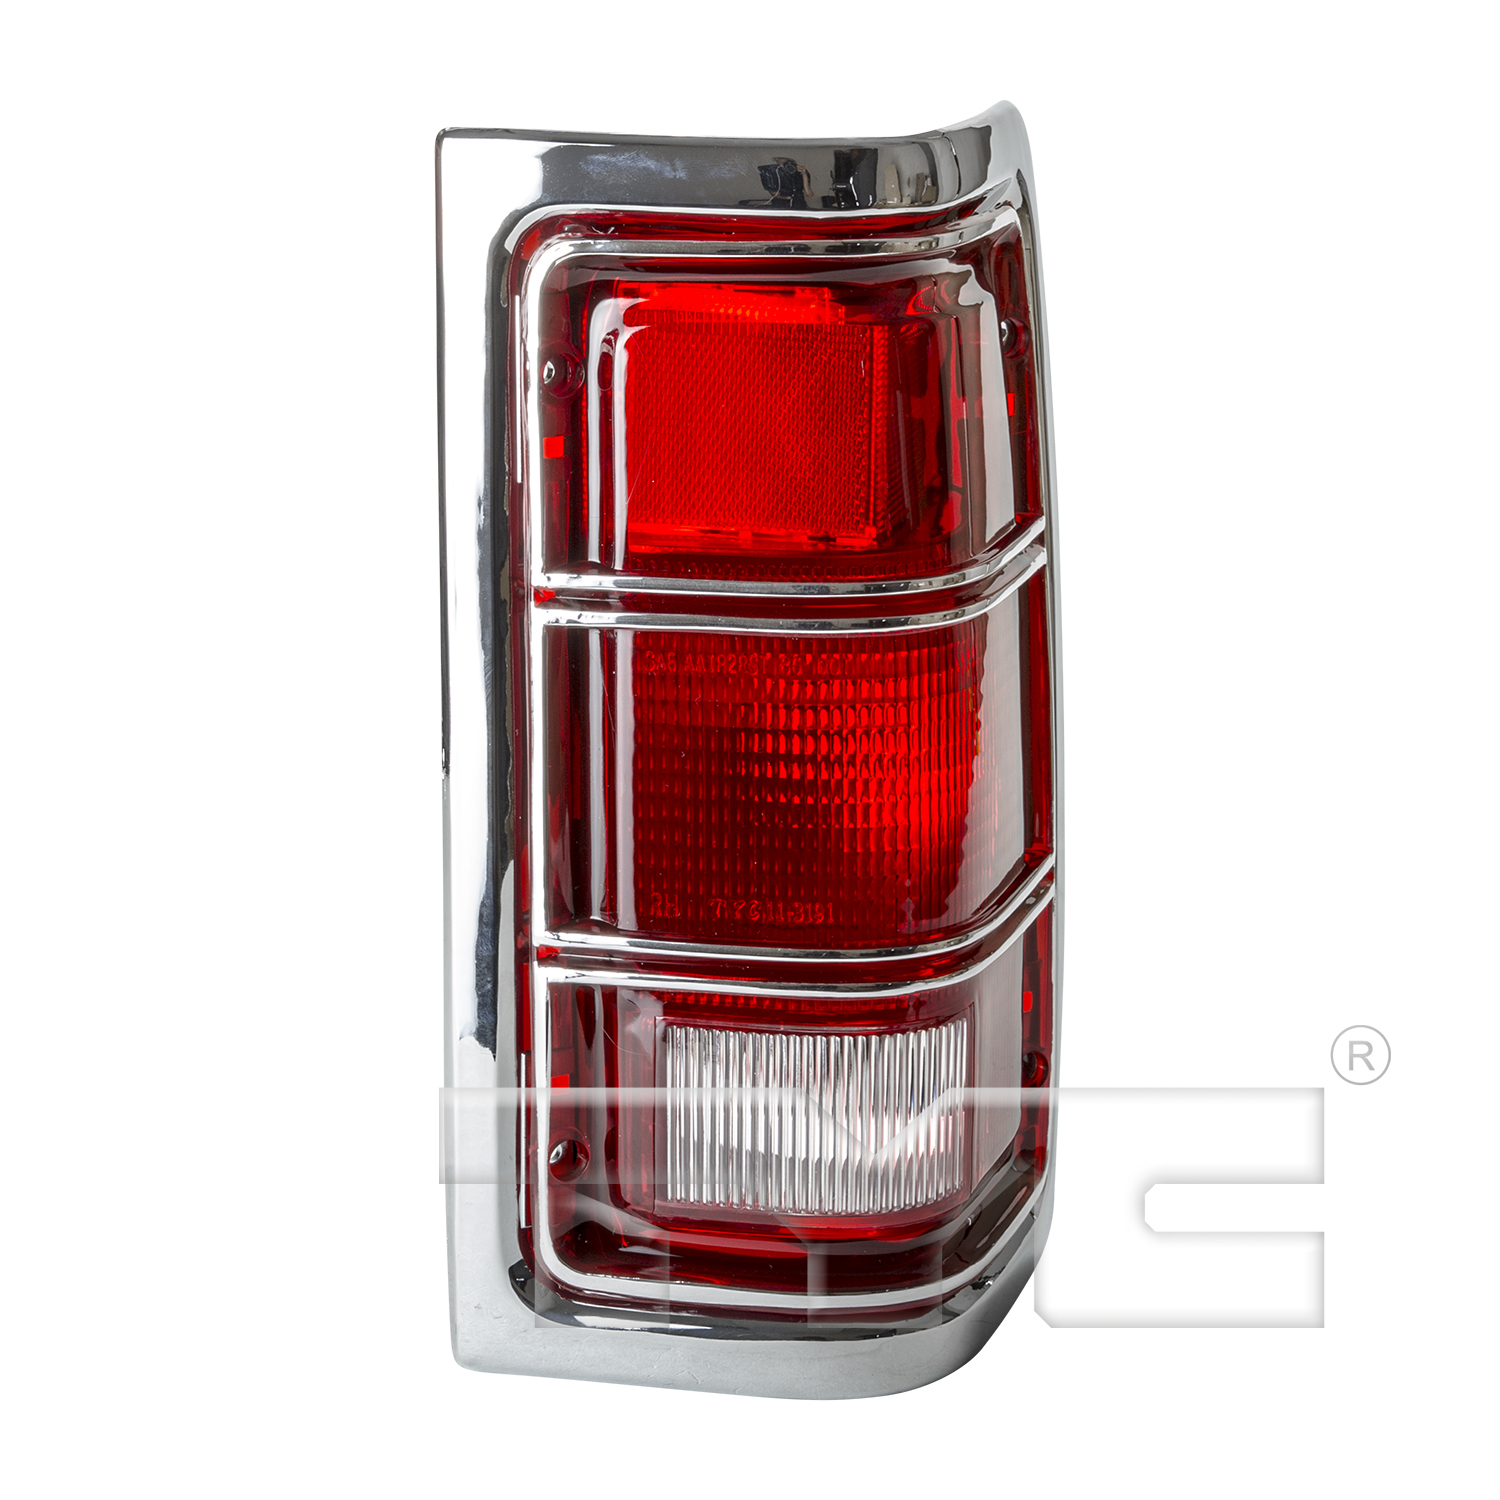 Aftermarket TAILLIGHTS for DODGE - D250, D250,81-87,RT Taillamp lens